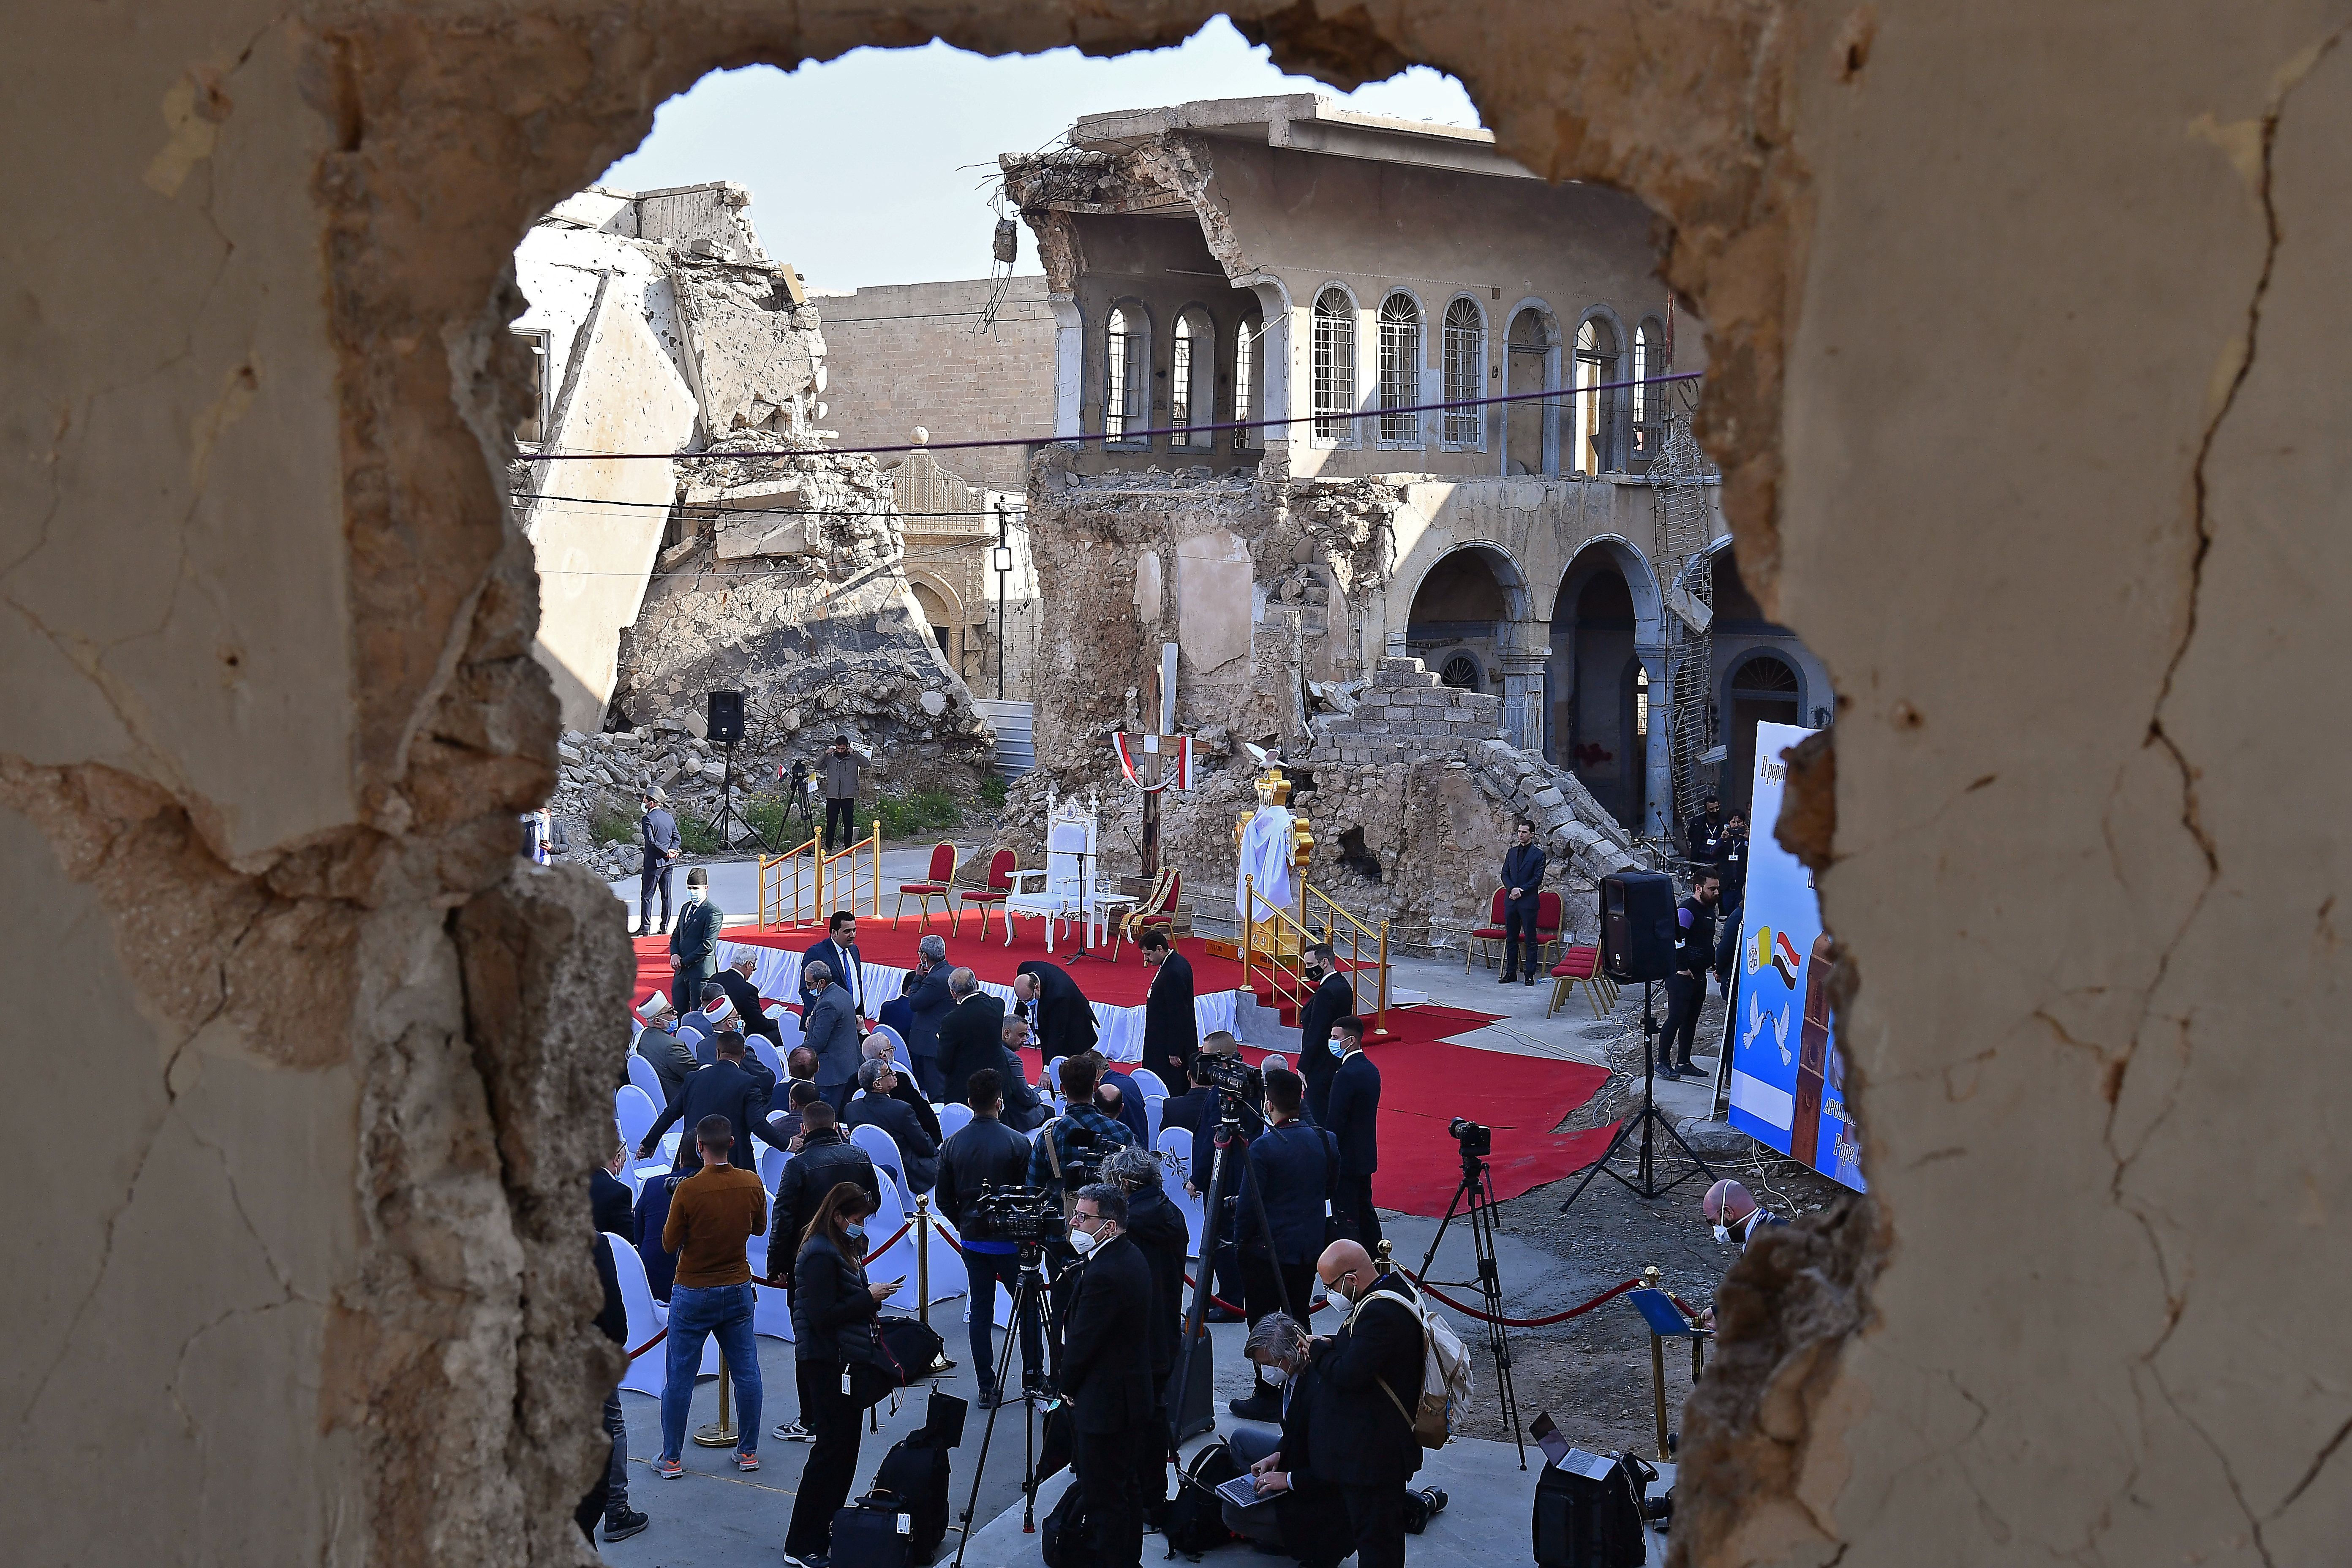  Iraqis gather in the ruins of the Syriac Catholic Church of the Immaculate Conception (al-Tahira-l-Kubra), in the northern city of Mosul, amidst preparations ahead of the Pope's visit, on March 7